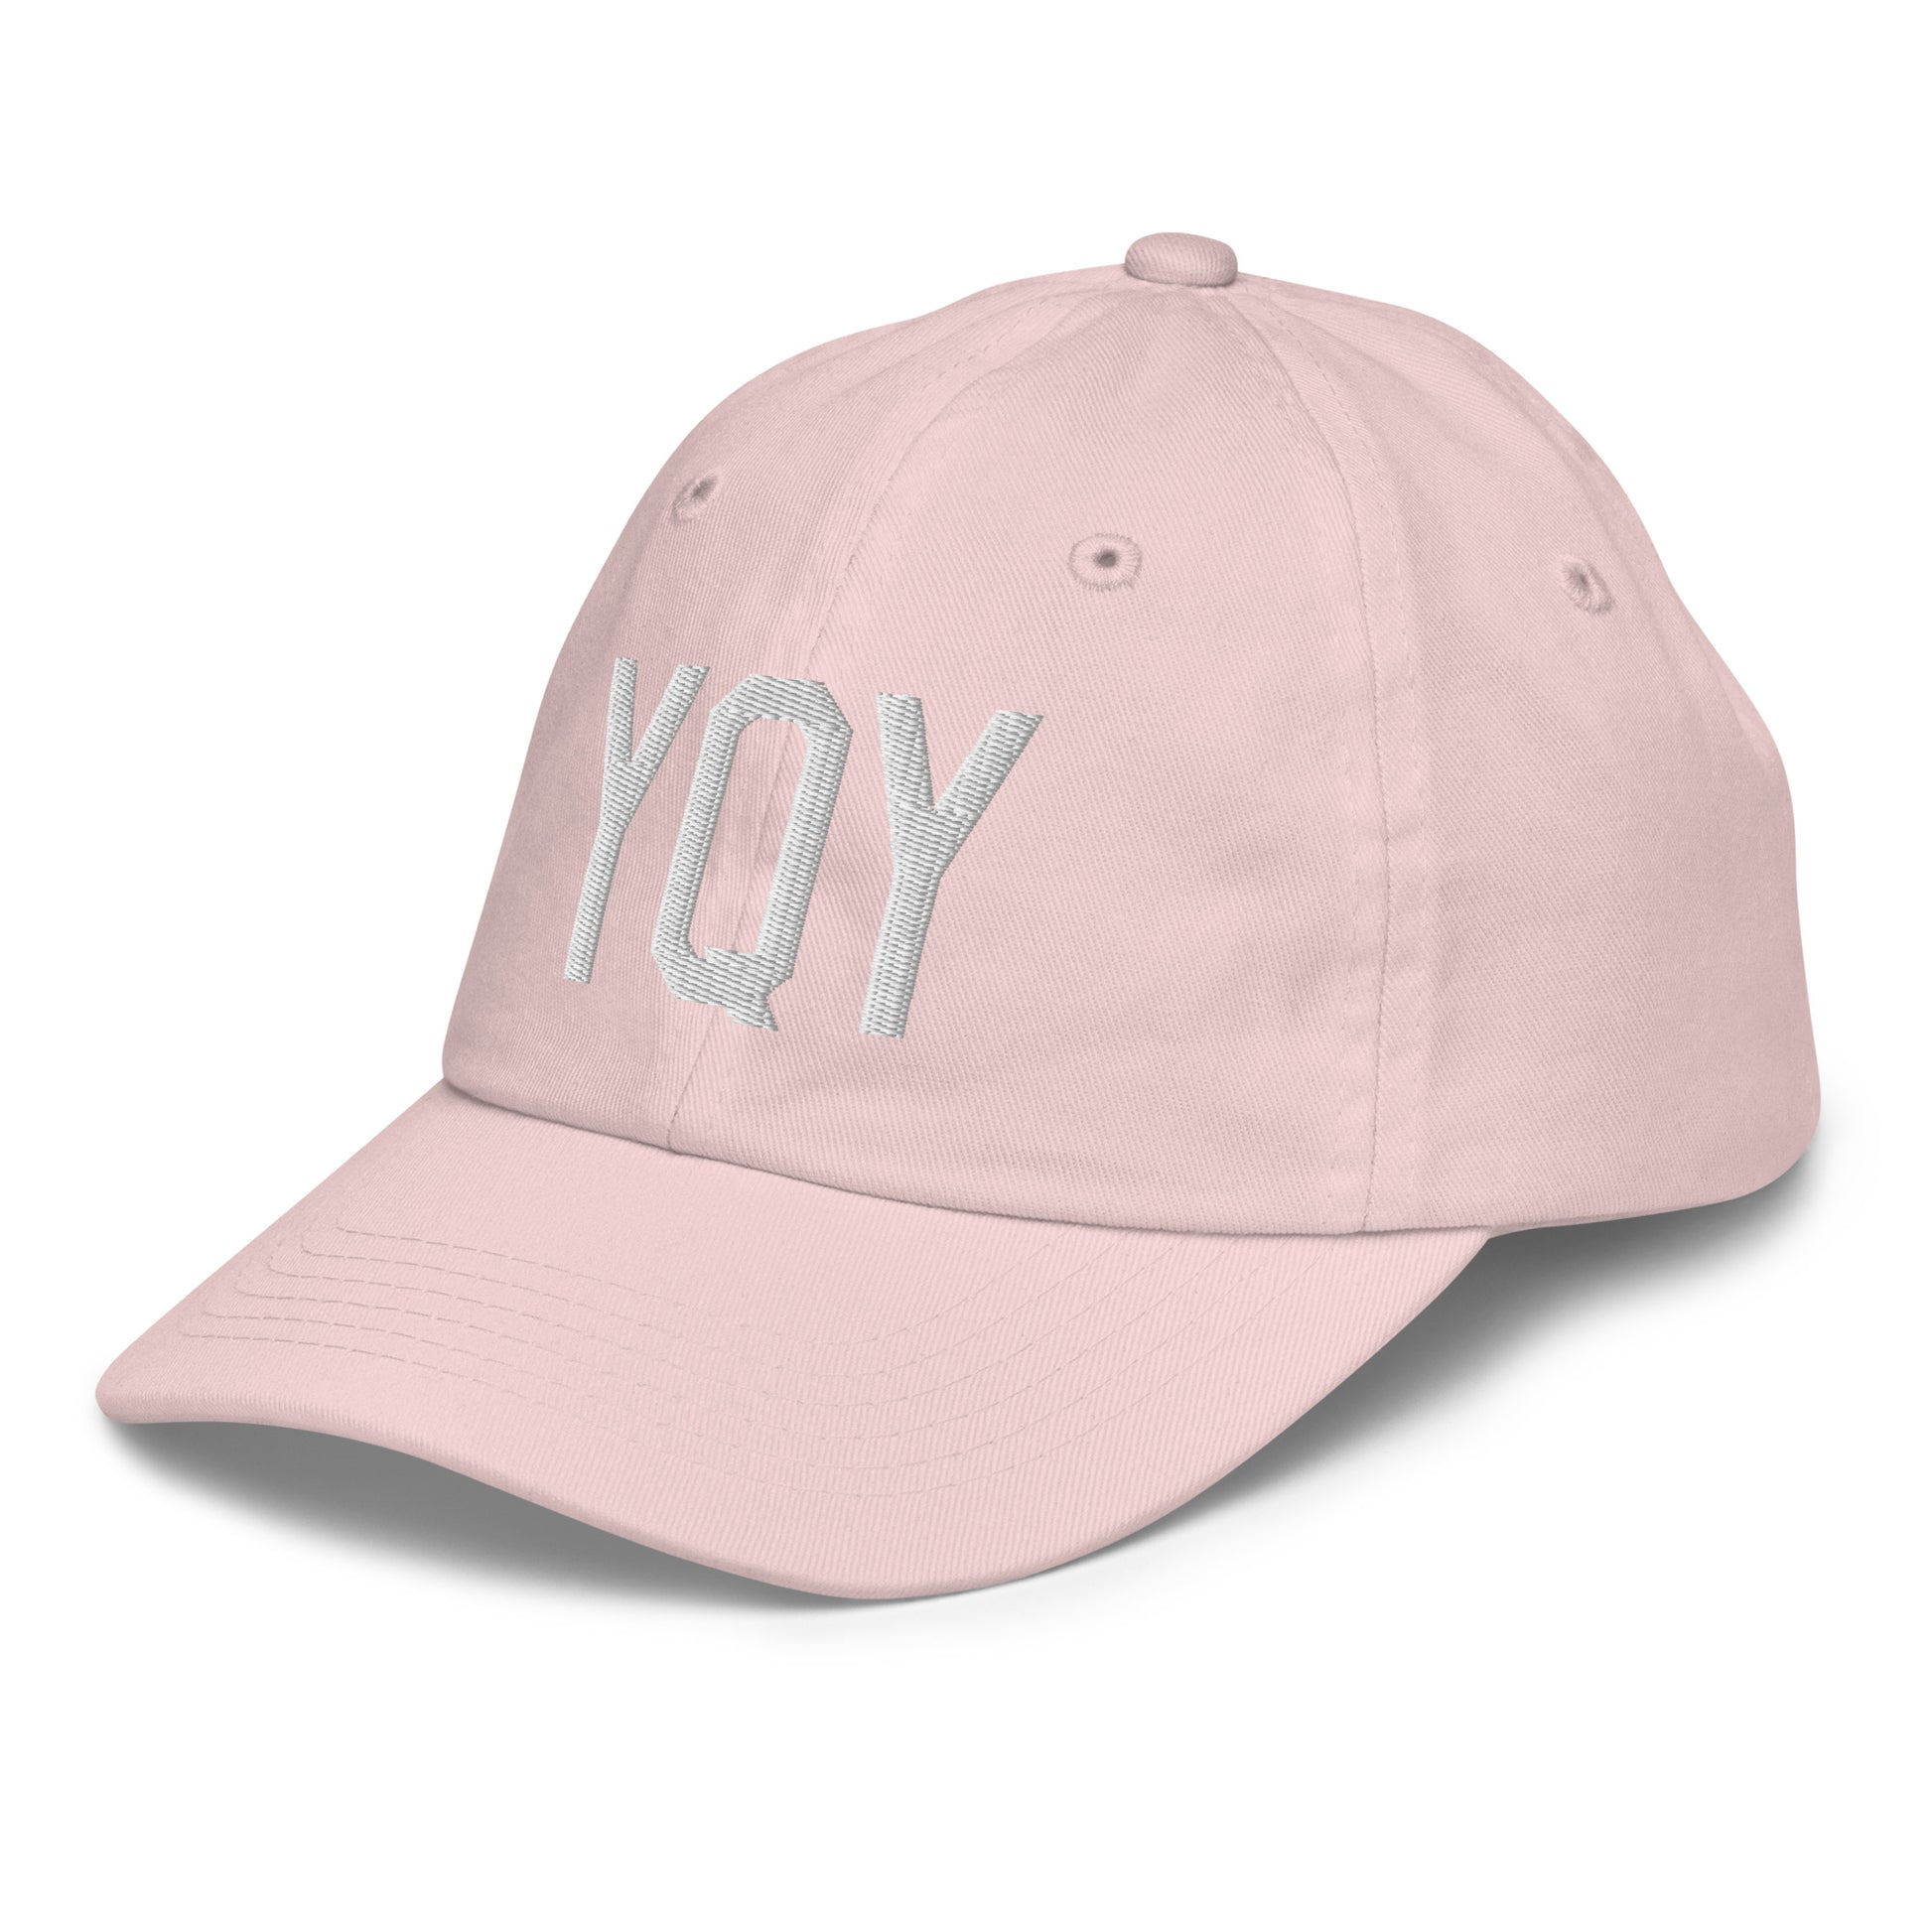 Airport Code Kid's Baseball Cap - White • YQY Sydney • YHM Designs - Image 33